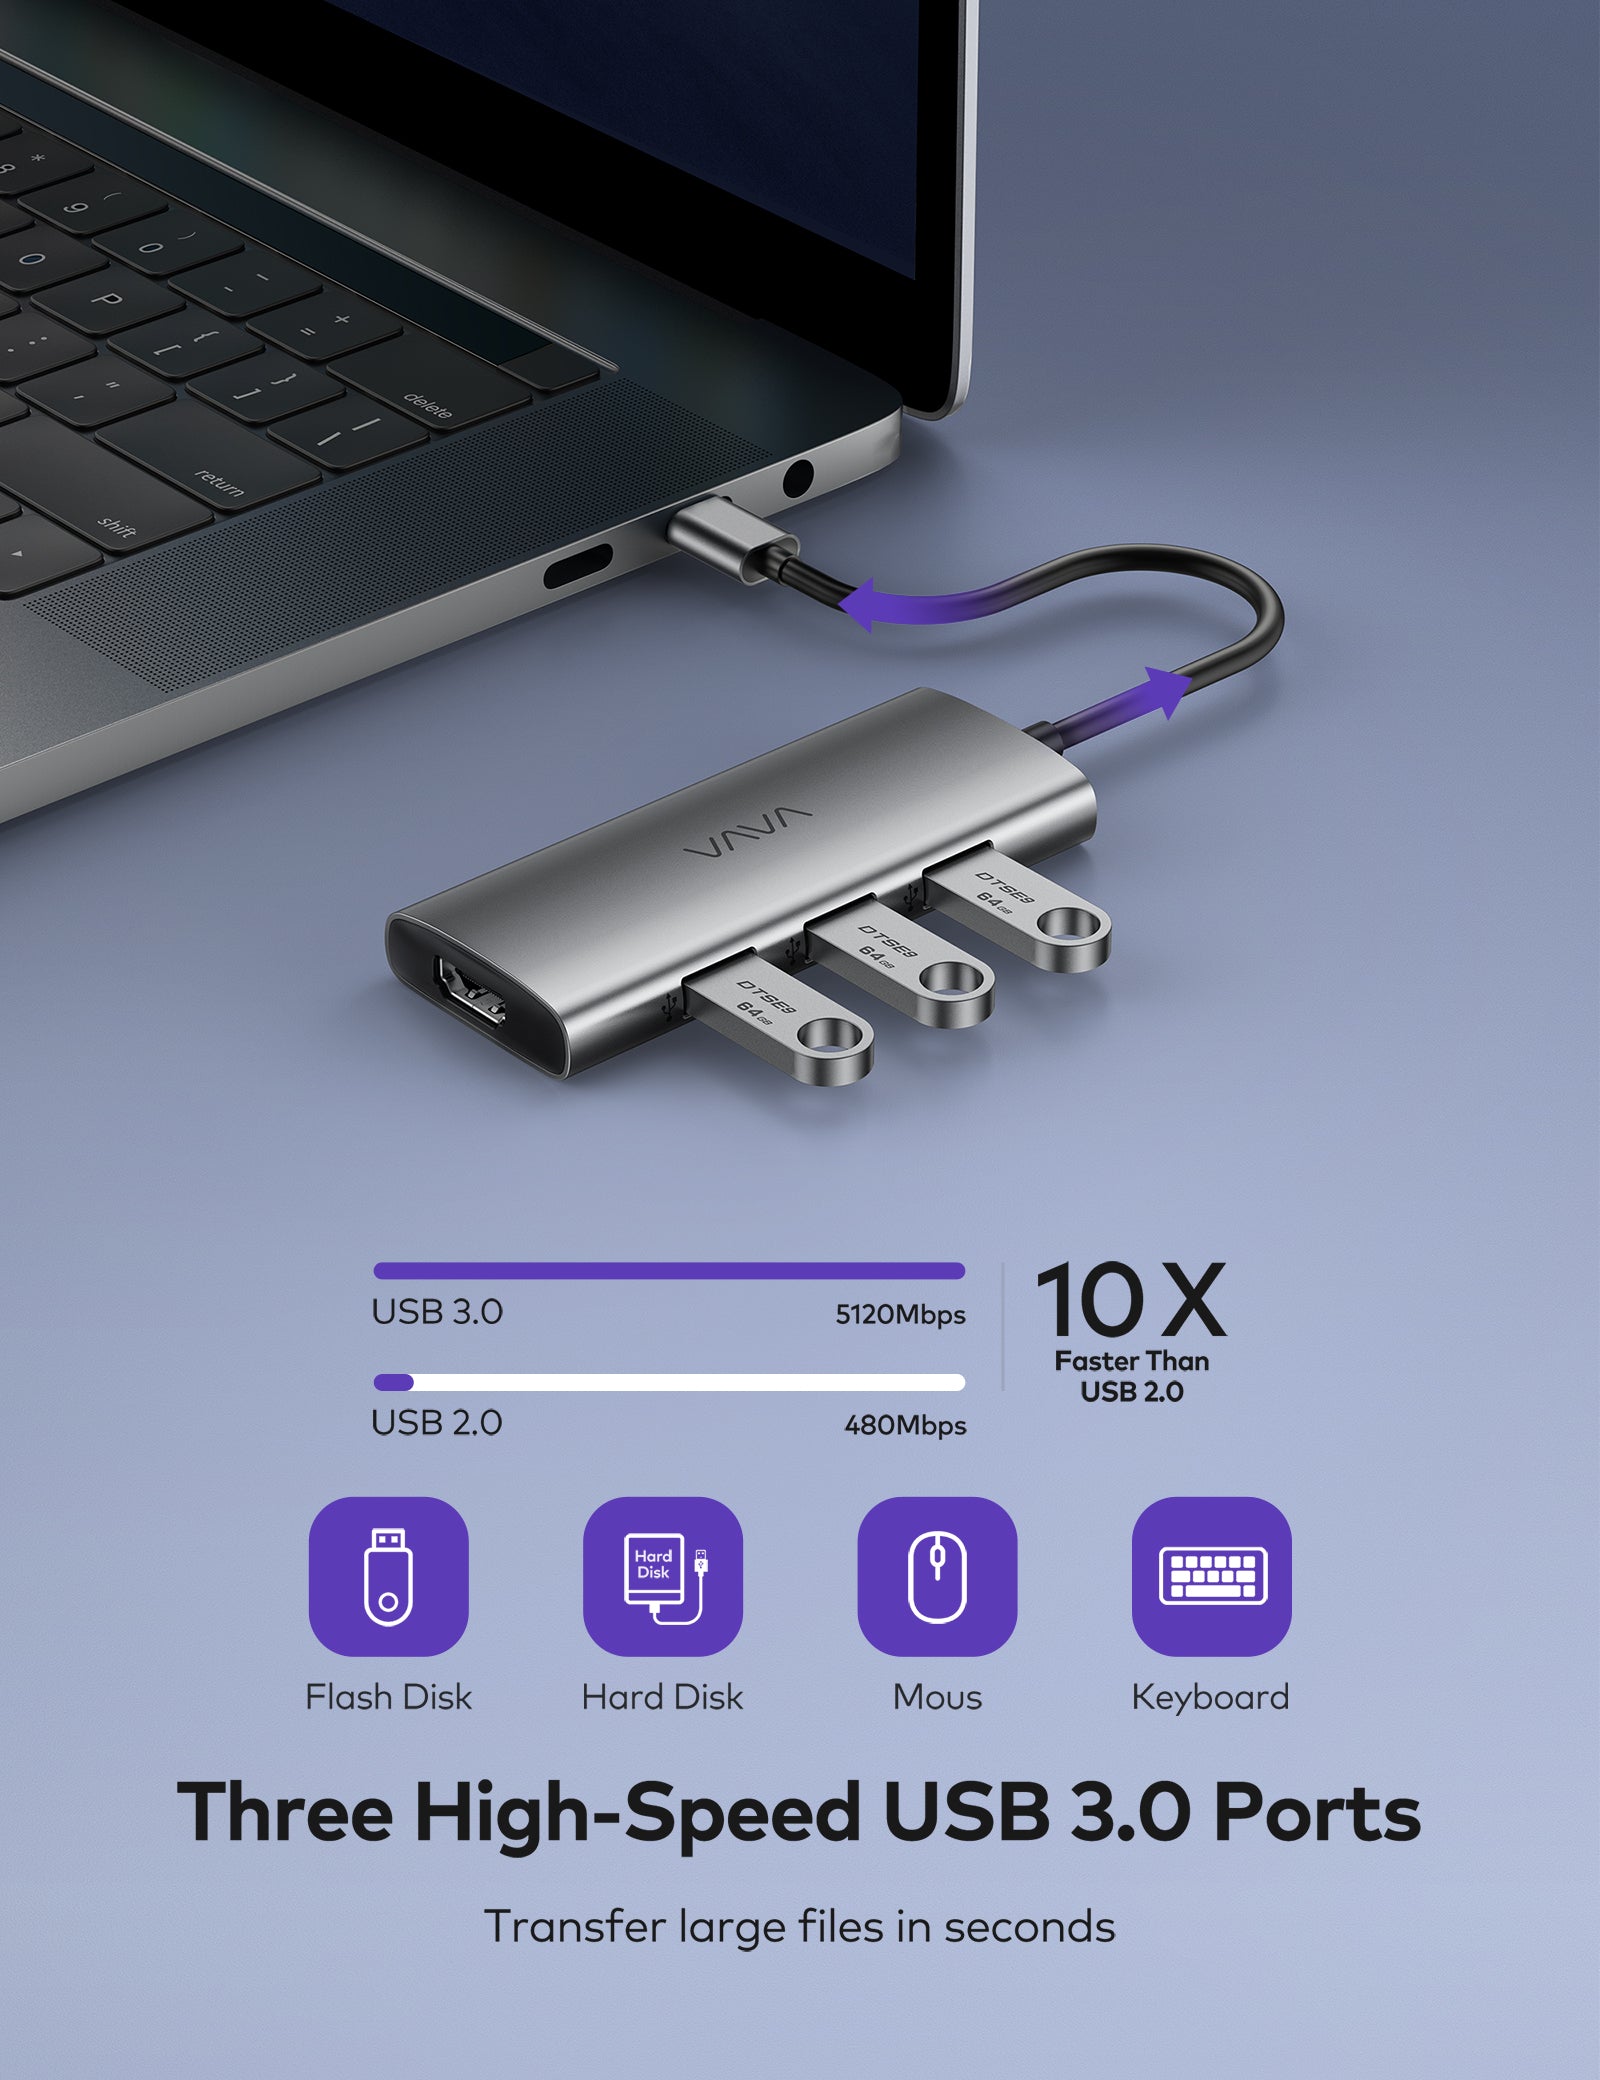 USB C Hub, 7-in-1 USB C Adapter with 100W Power Delivery Charging Port, 4K USB C to HDMI Port, 3 USB 3.0 Ports-RAVPower